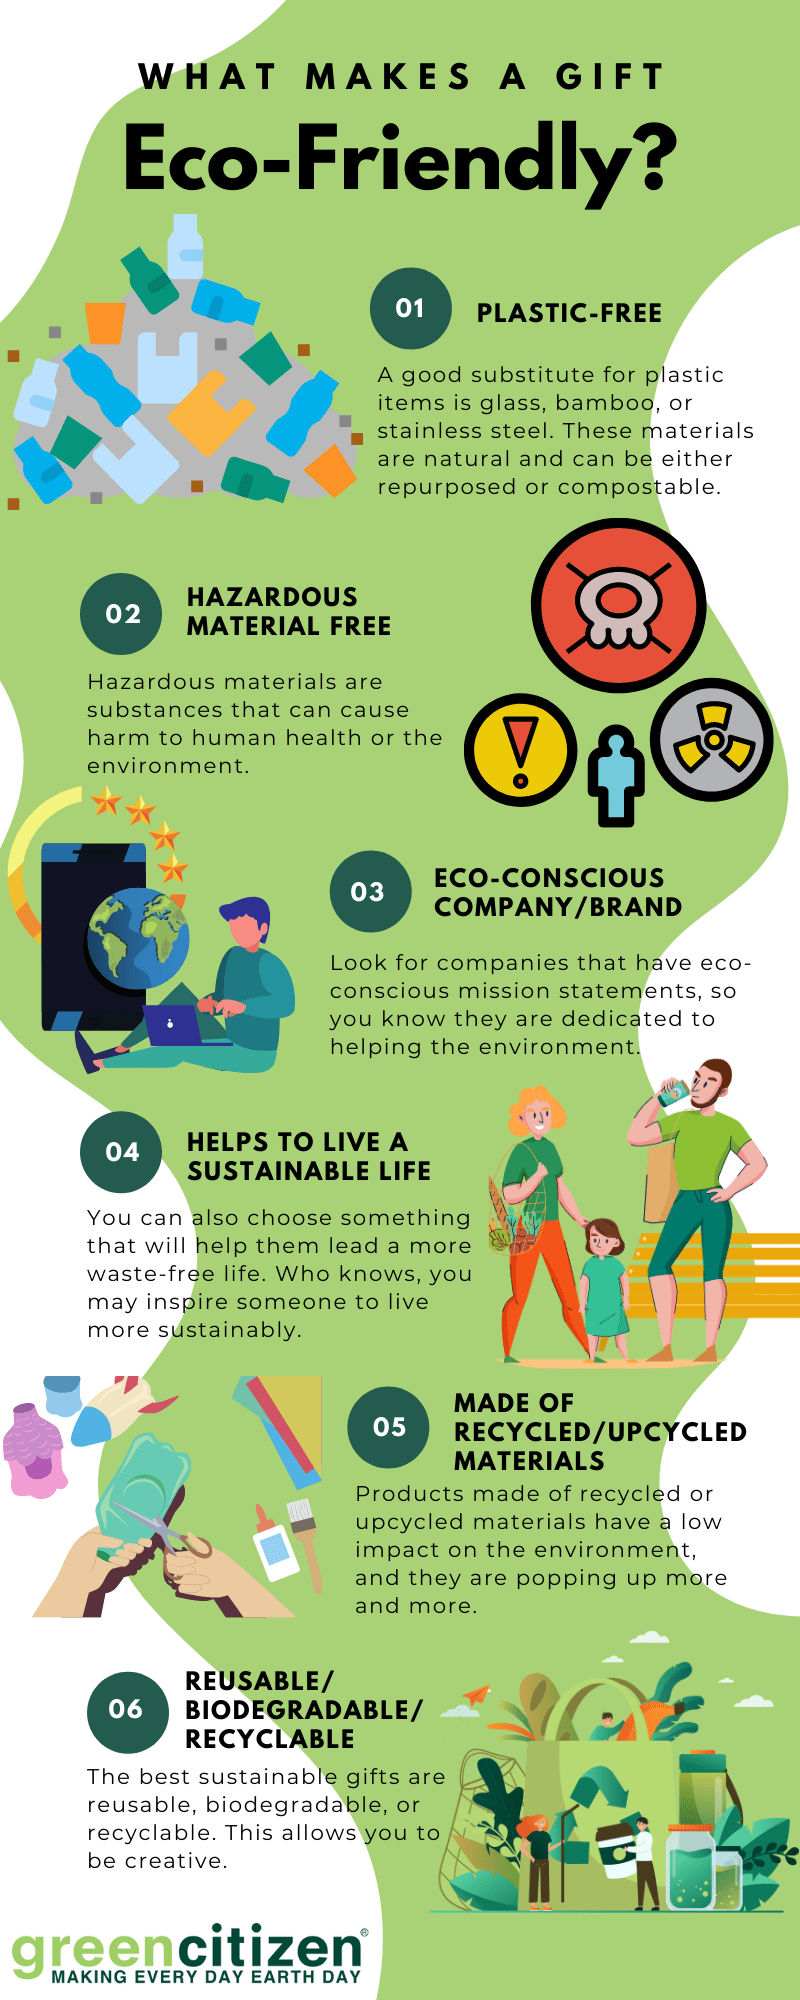 What makes a gift eco-friendly